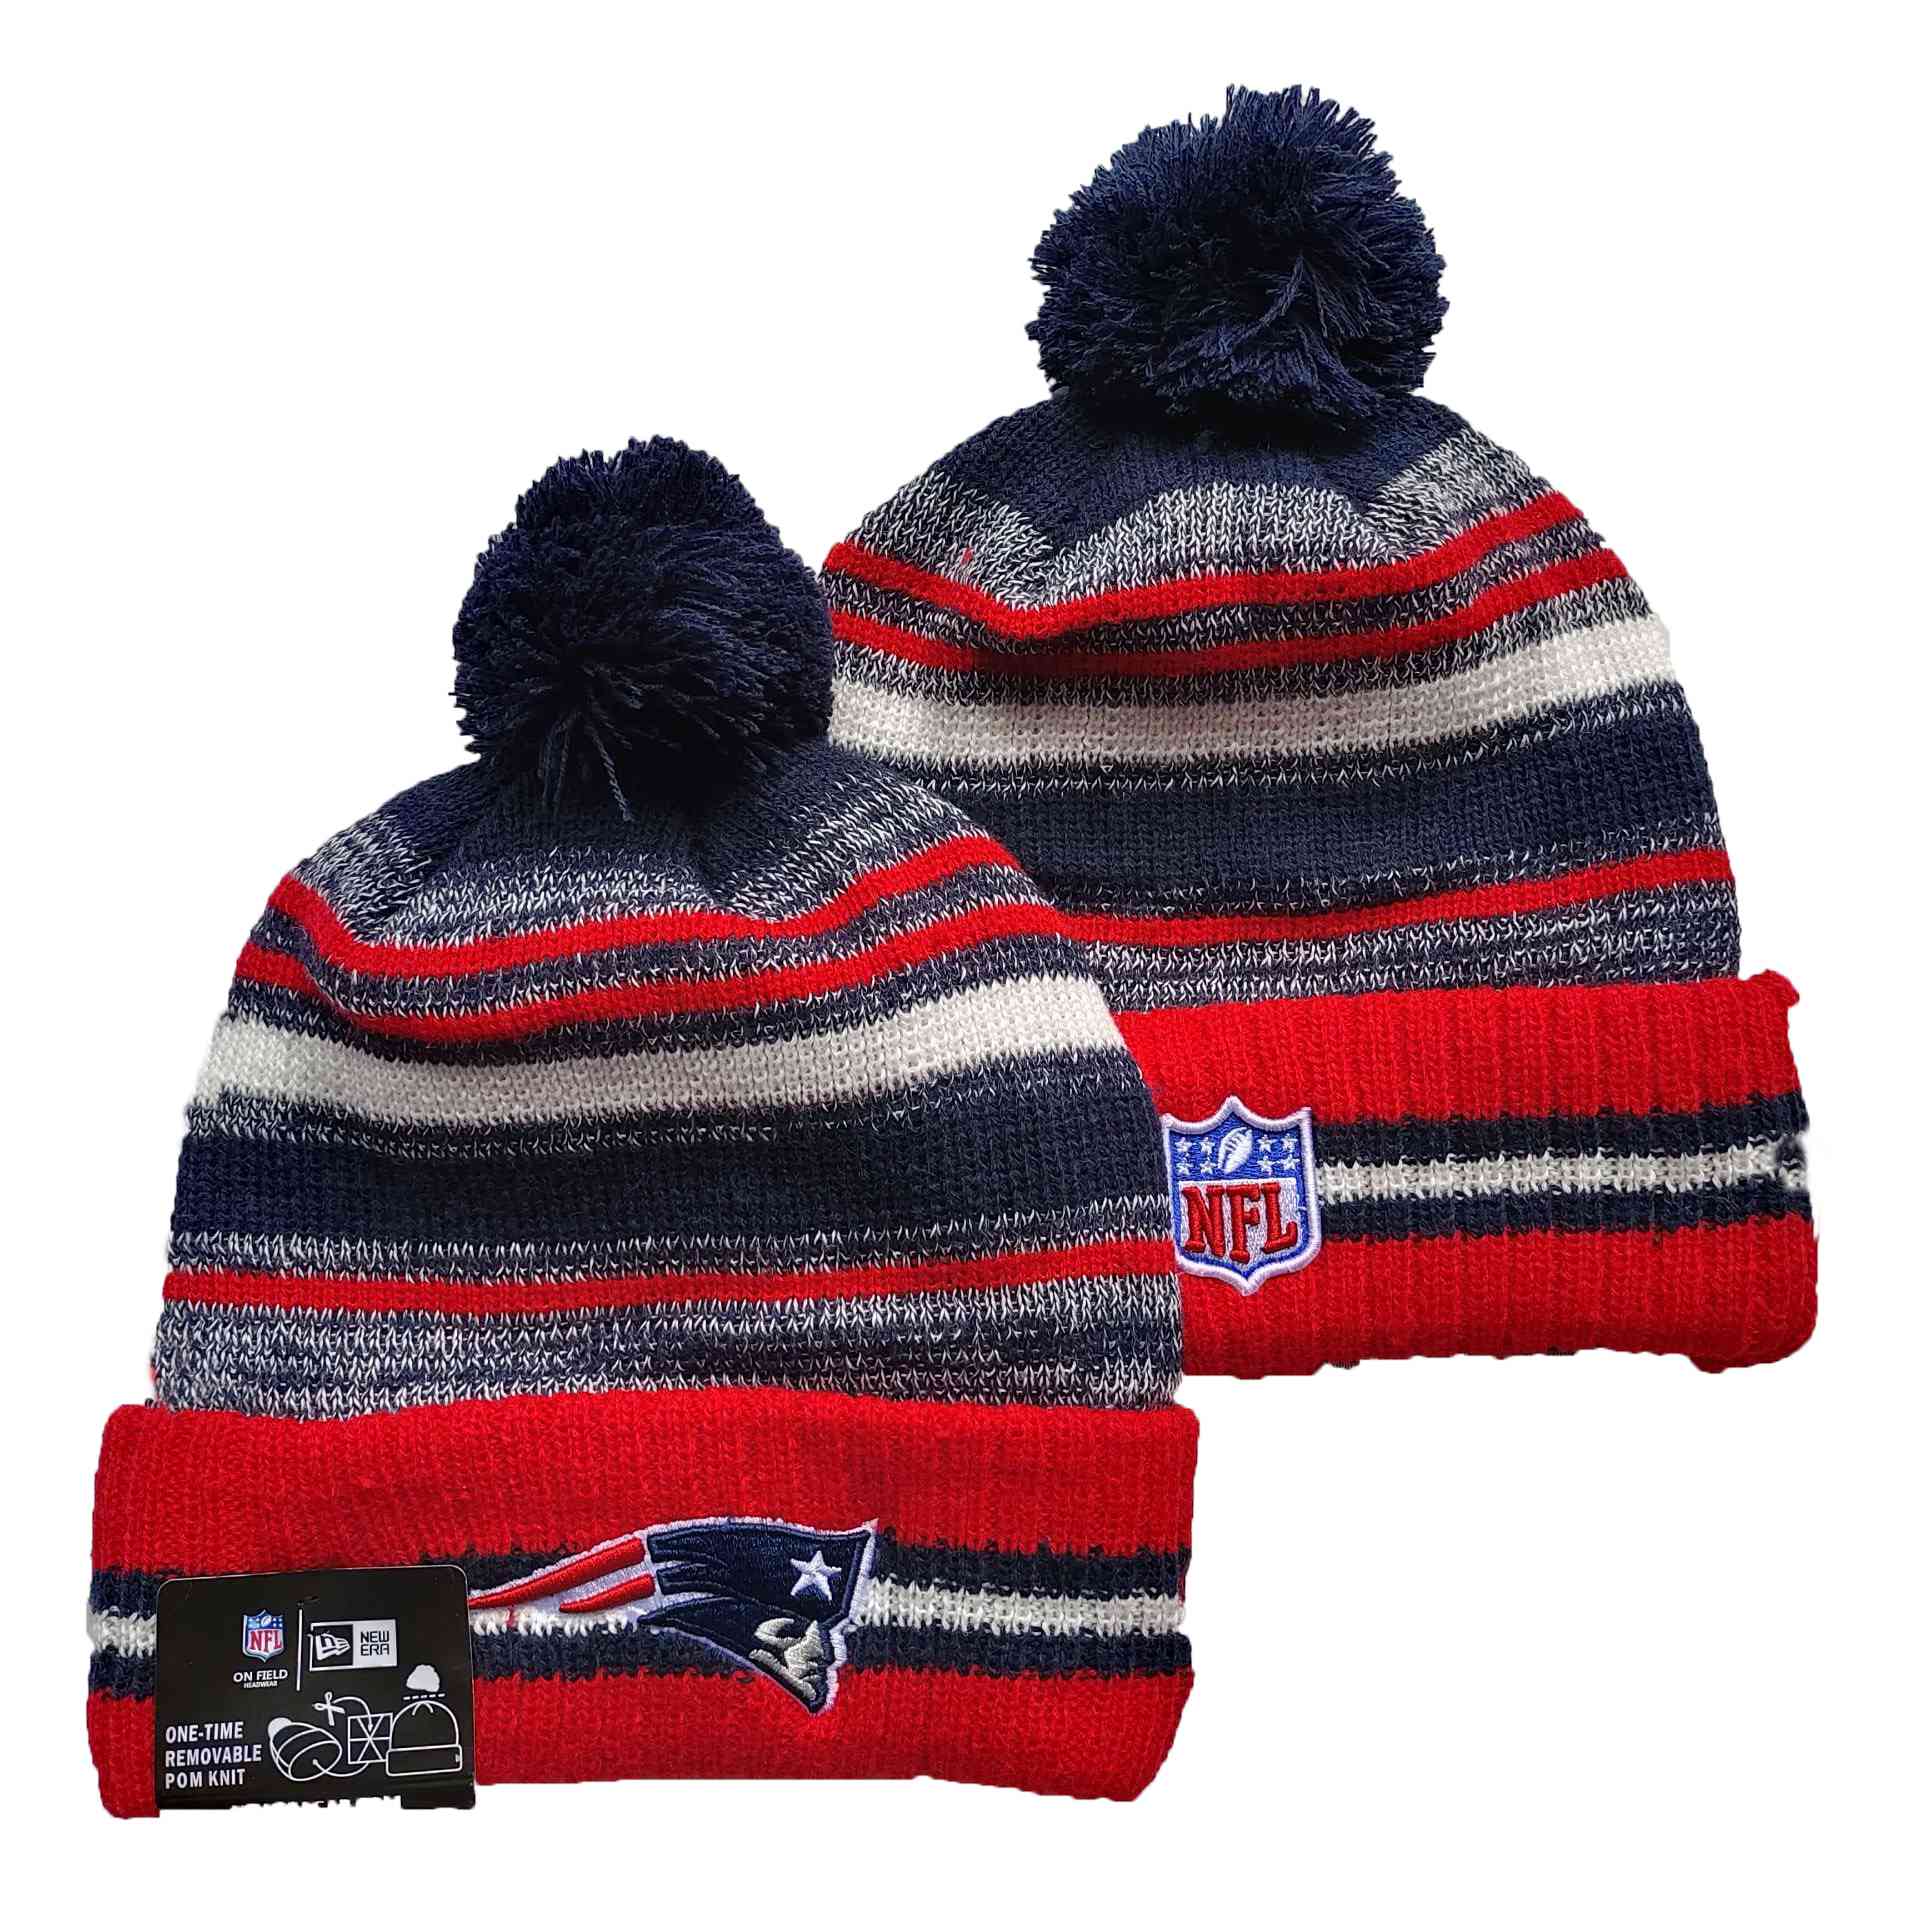 NFL New England Patriots Beanies Knit Hats-YD1255